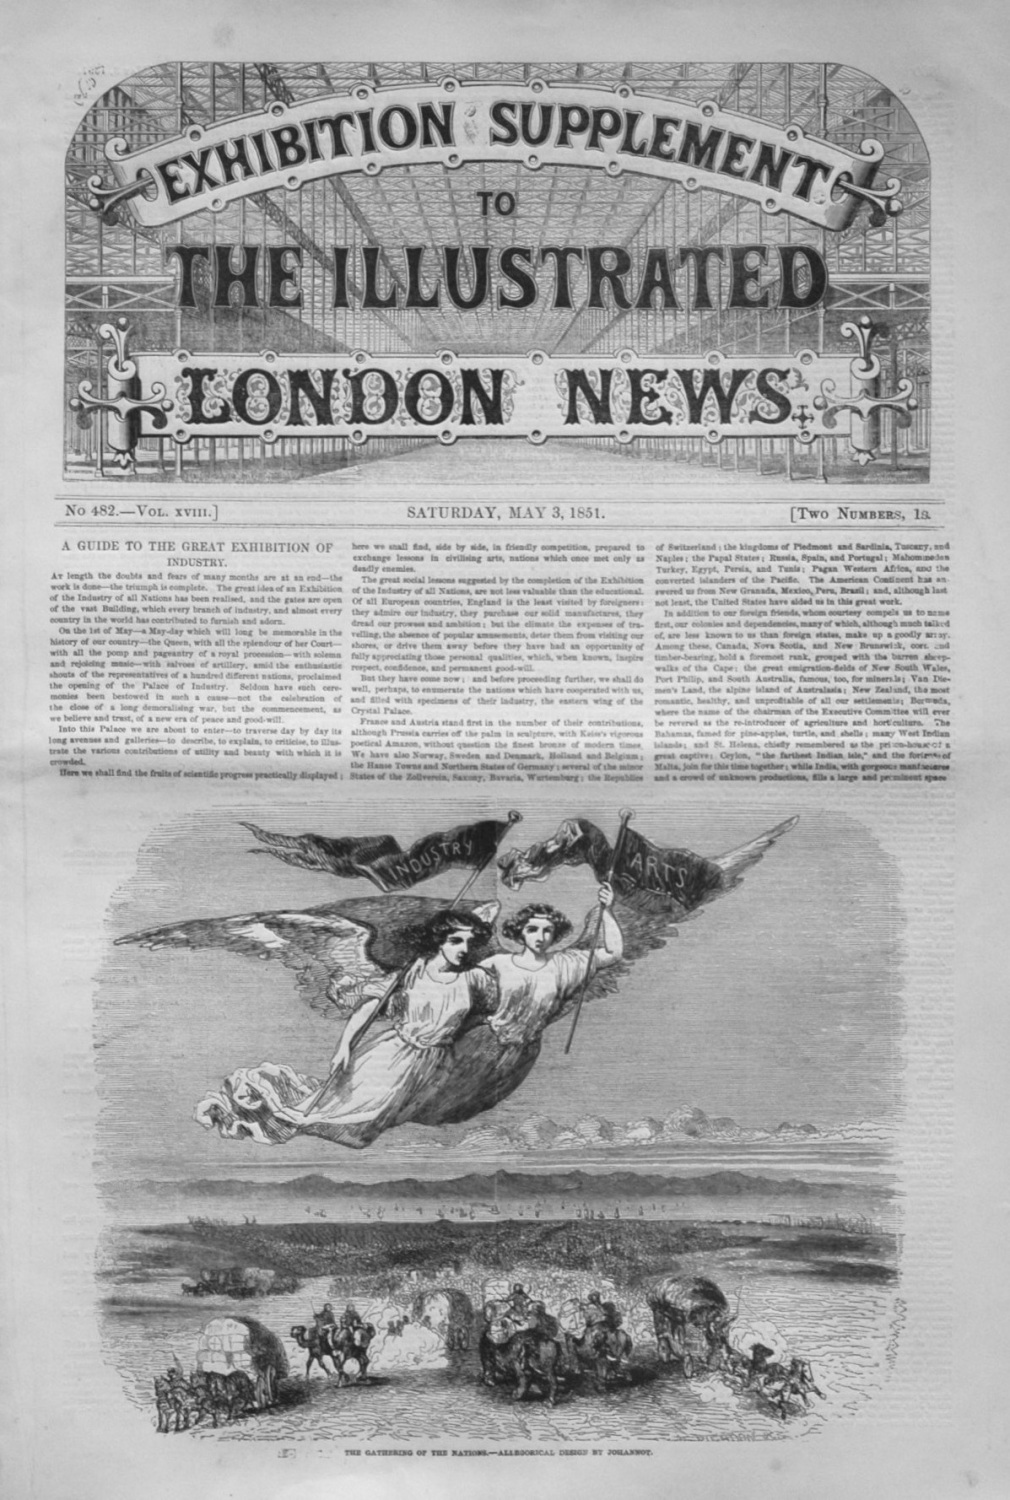 Exhibition Supplement to the Illustrated London News May 3rd 1851.